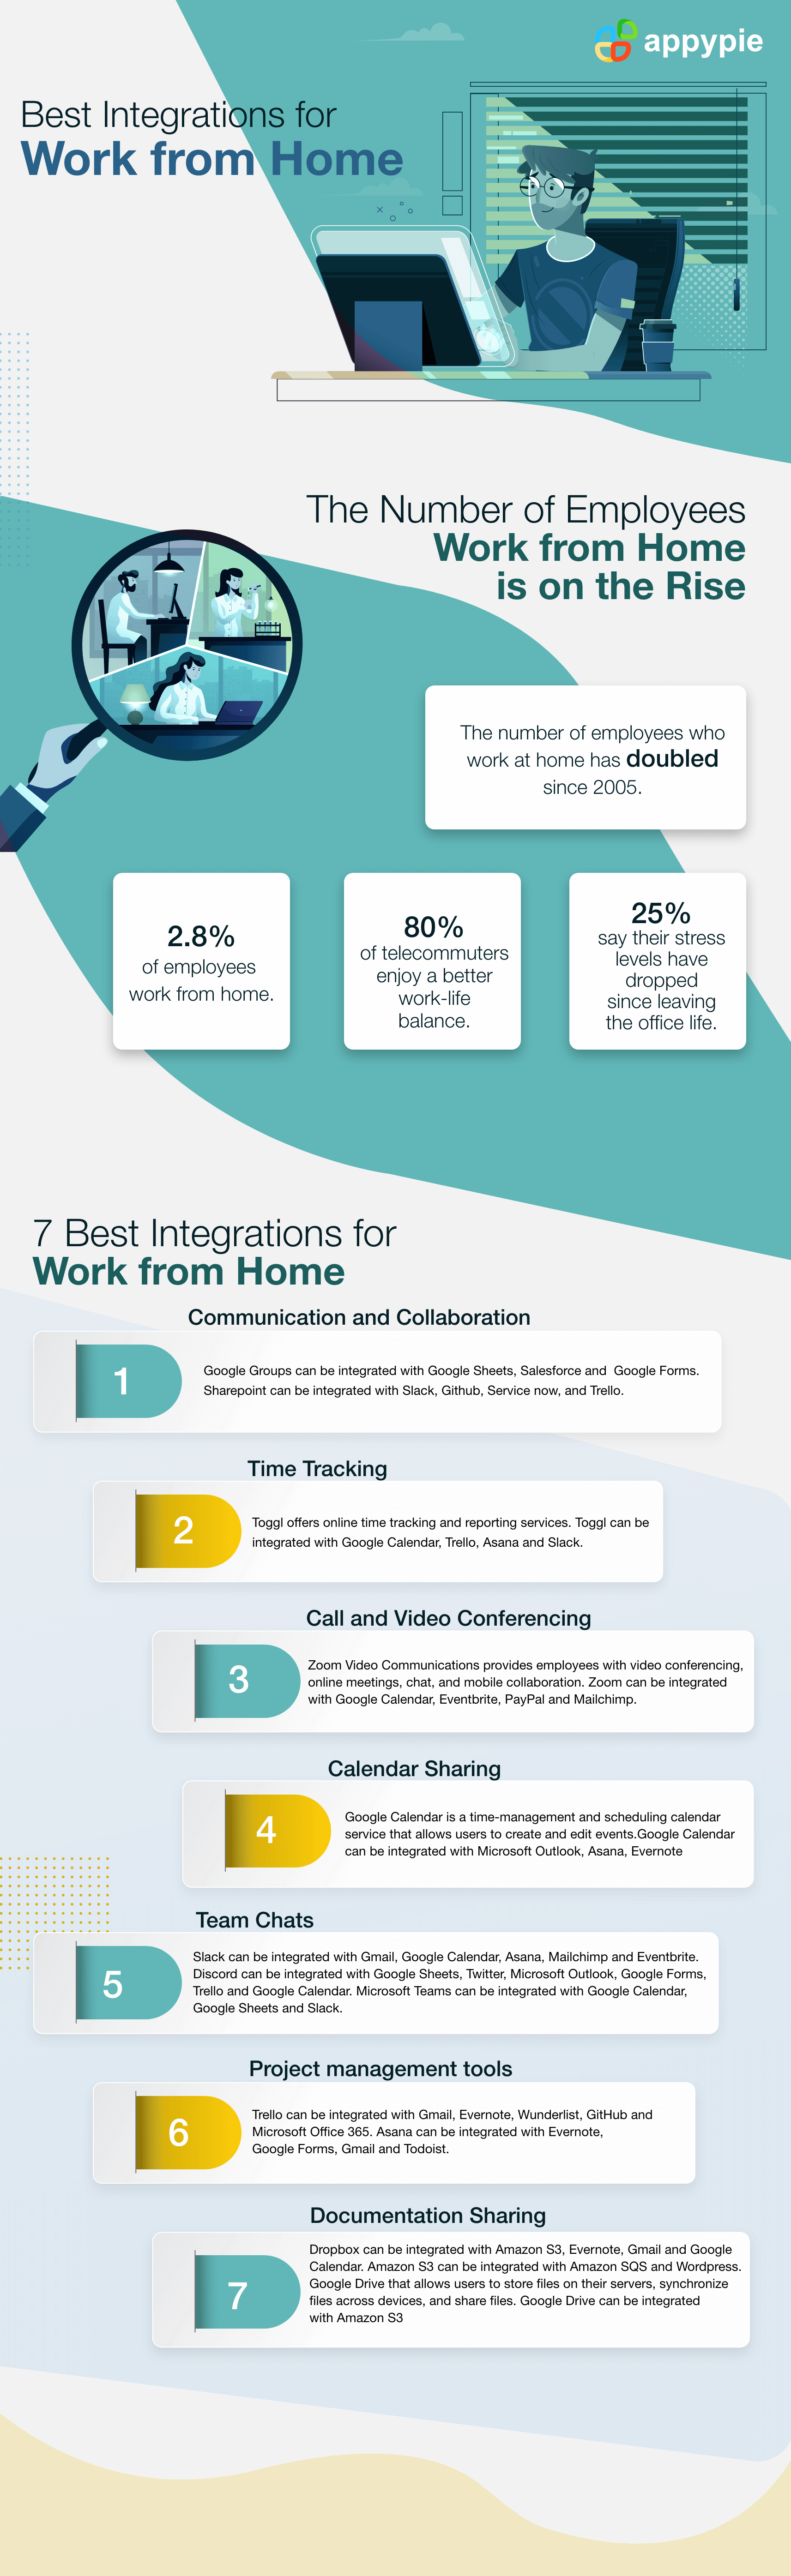 Best Integrations forWork from Home -AppyPie